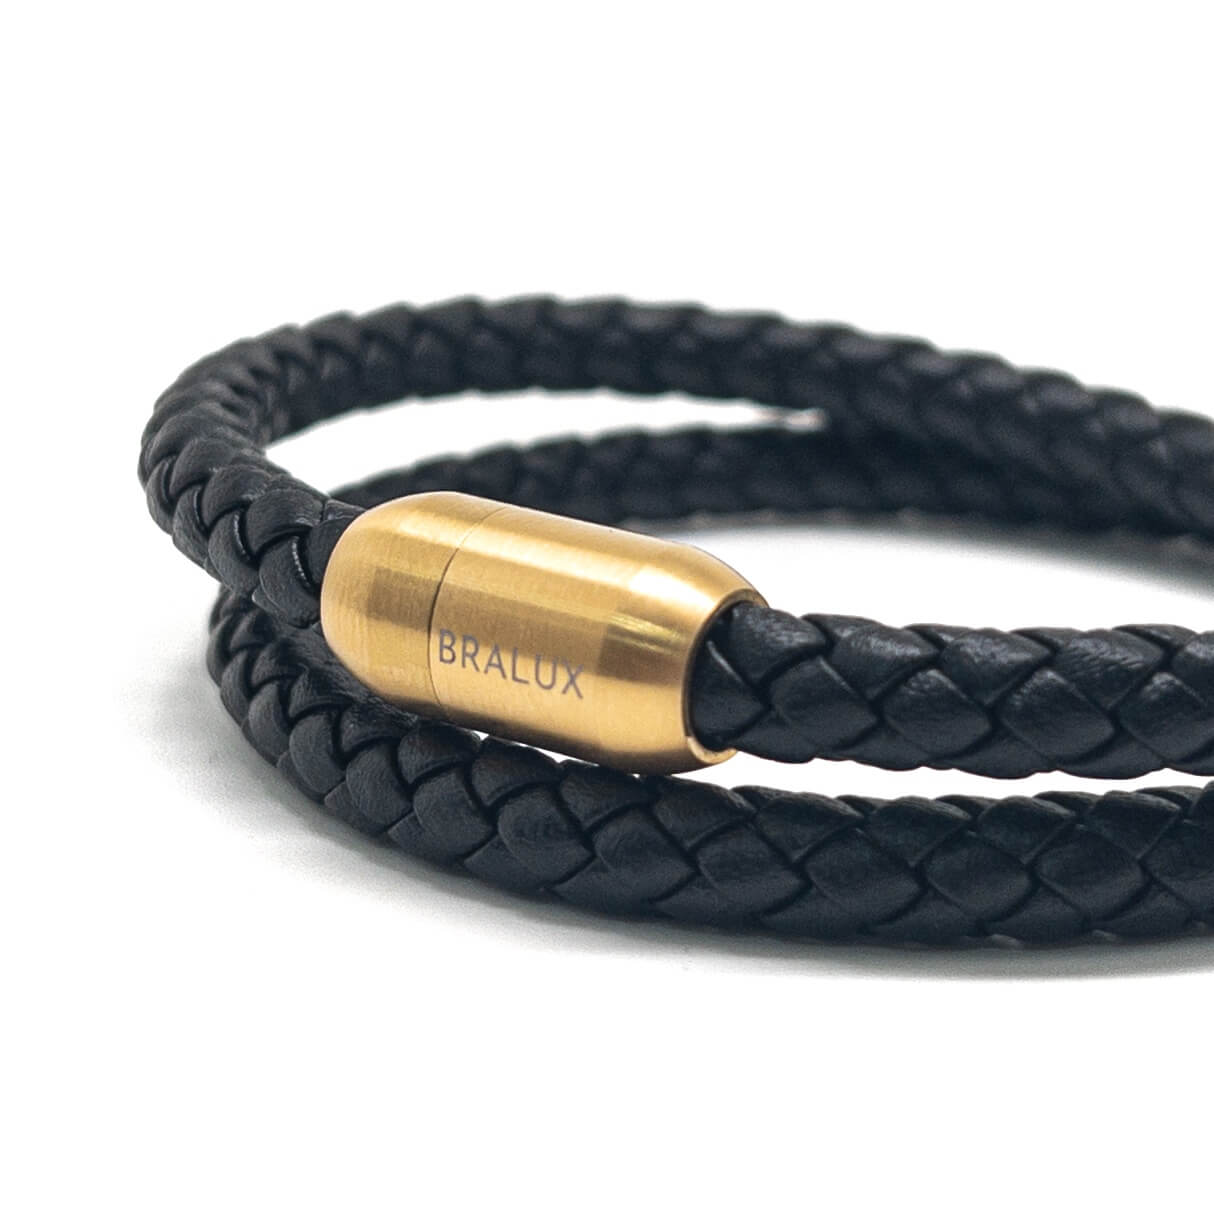 The 6mm Duo Black and Gold Leather Bracelet